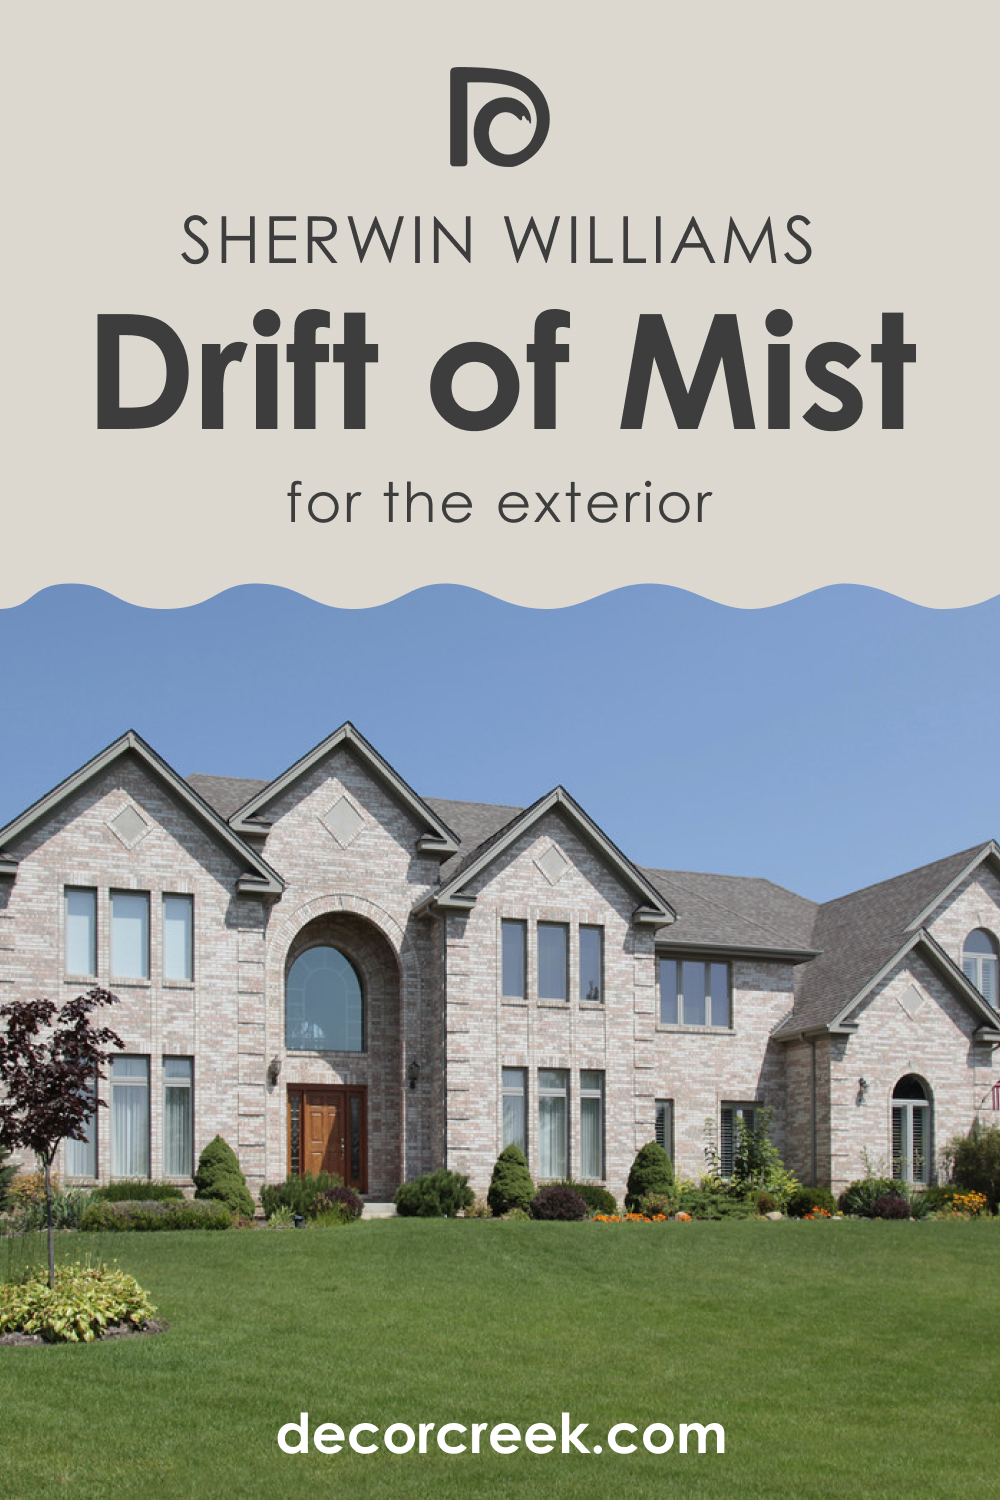 How to Use SW 9166 Drift of Mist for an Exterior?